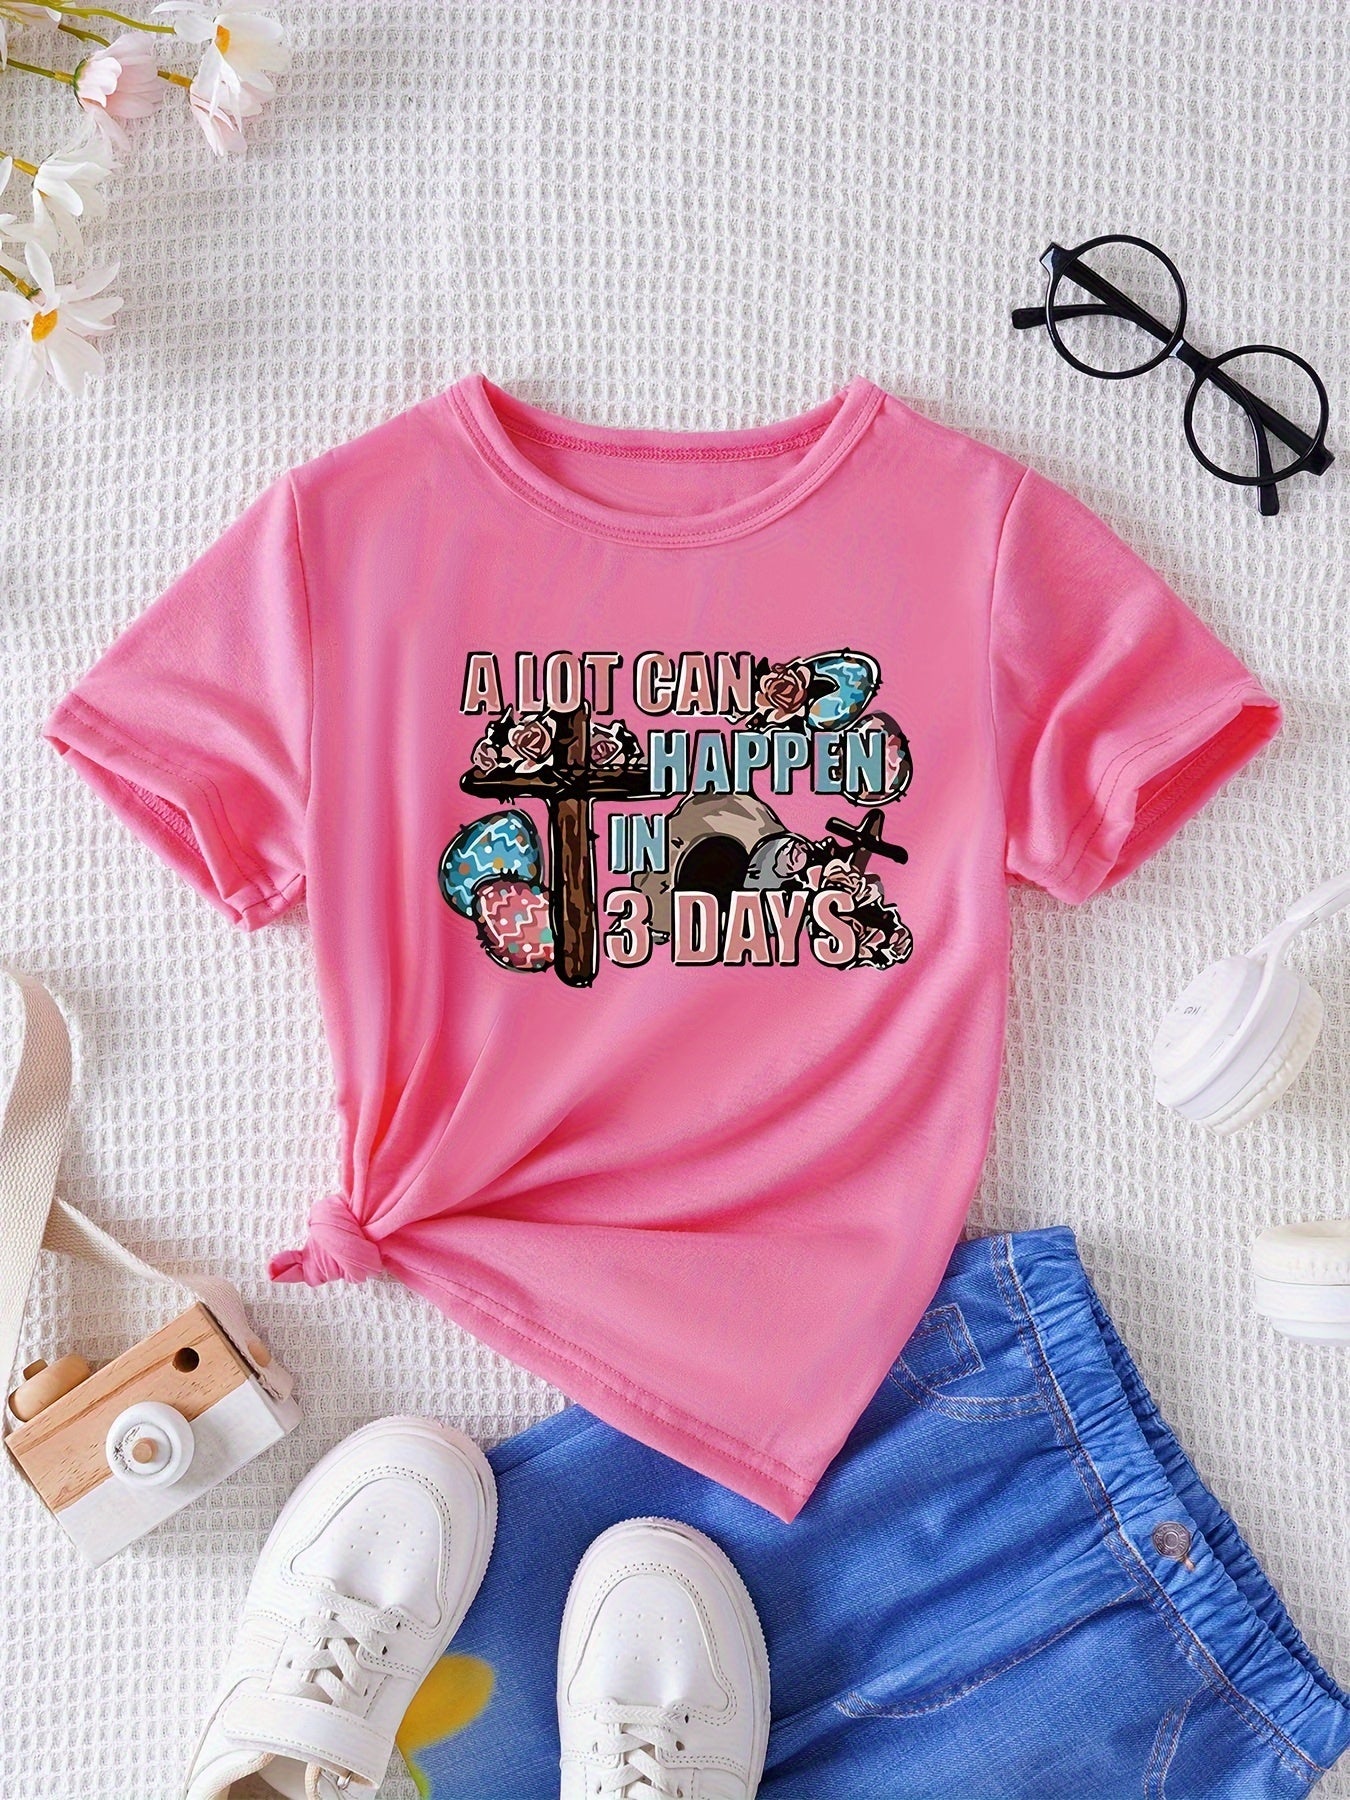 A LOT CAN HAPPEN IN 3 DAYS Youth Christian T-shirt claimedbygoddesigns